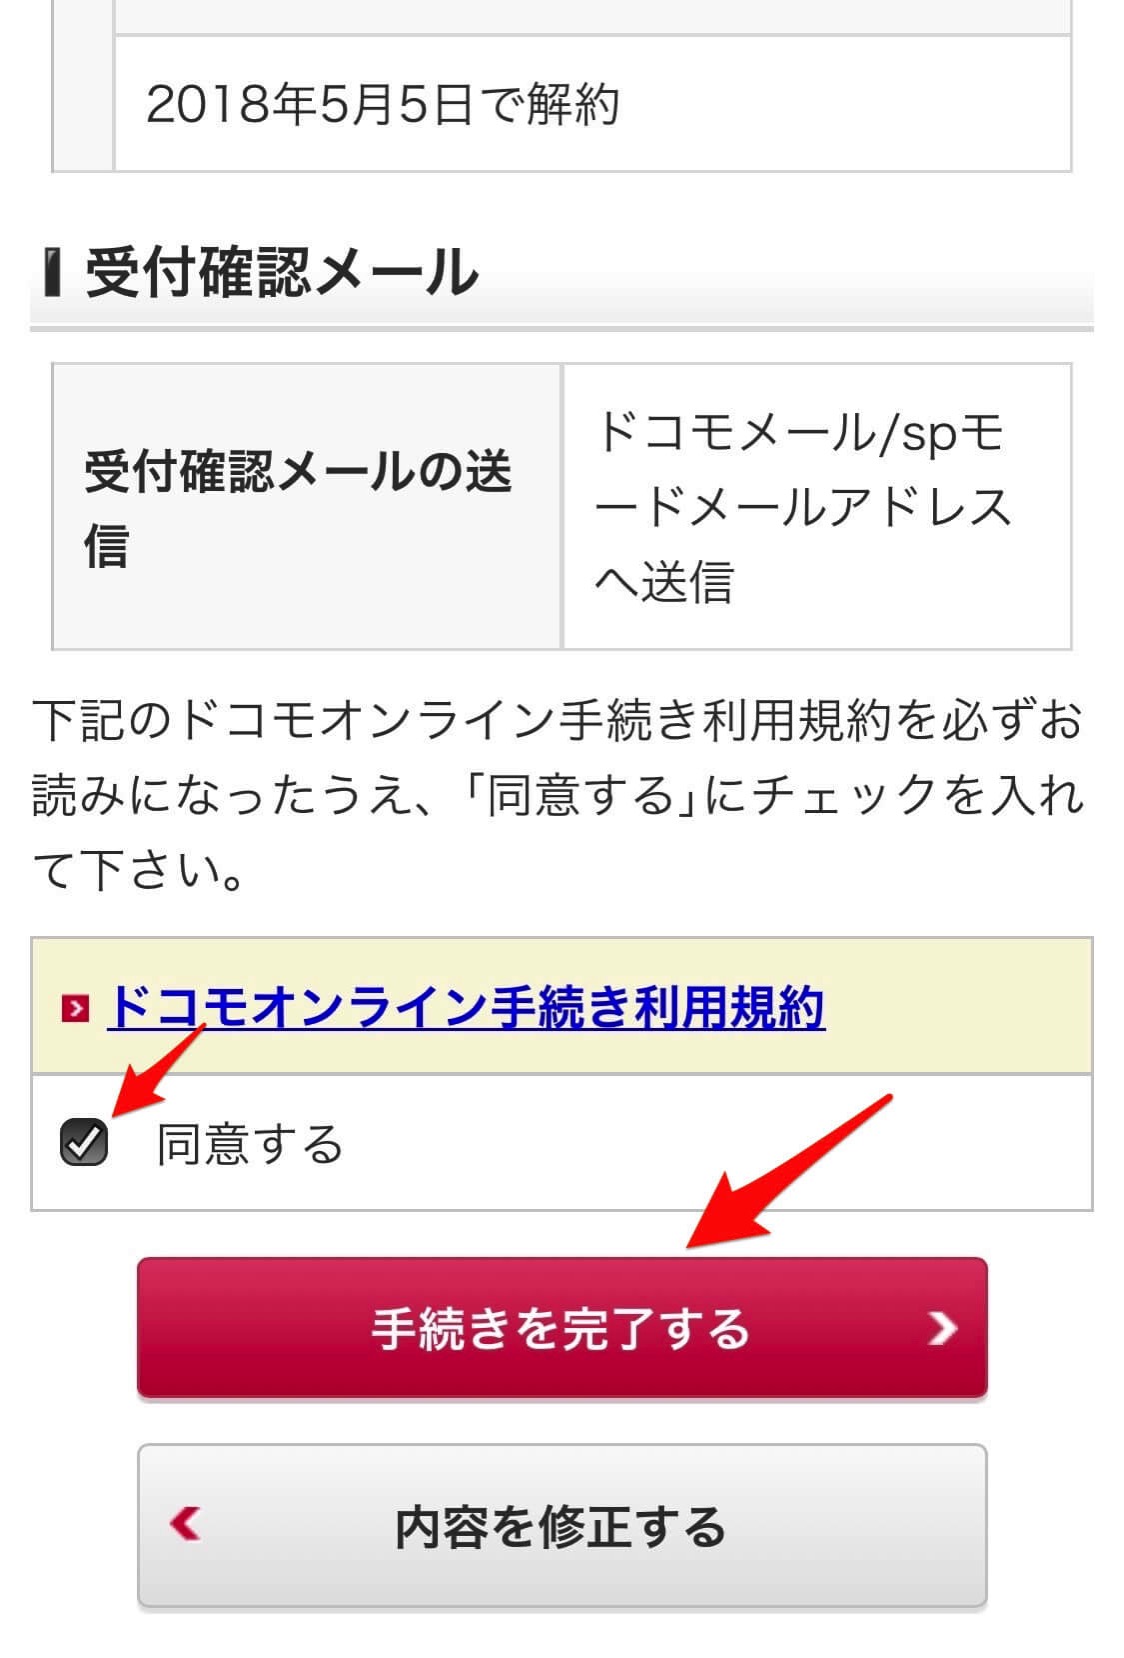 The docomo one number service cancellation of a contract 9